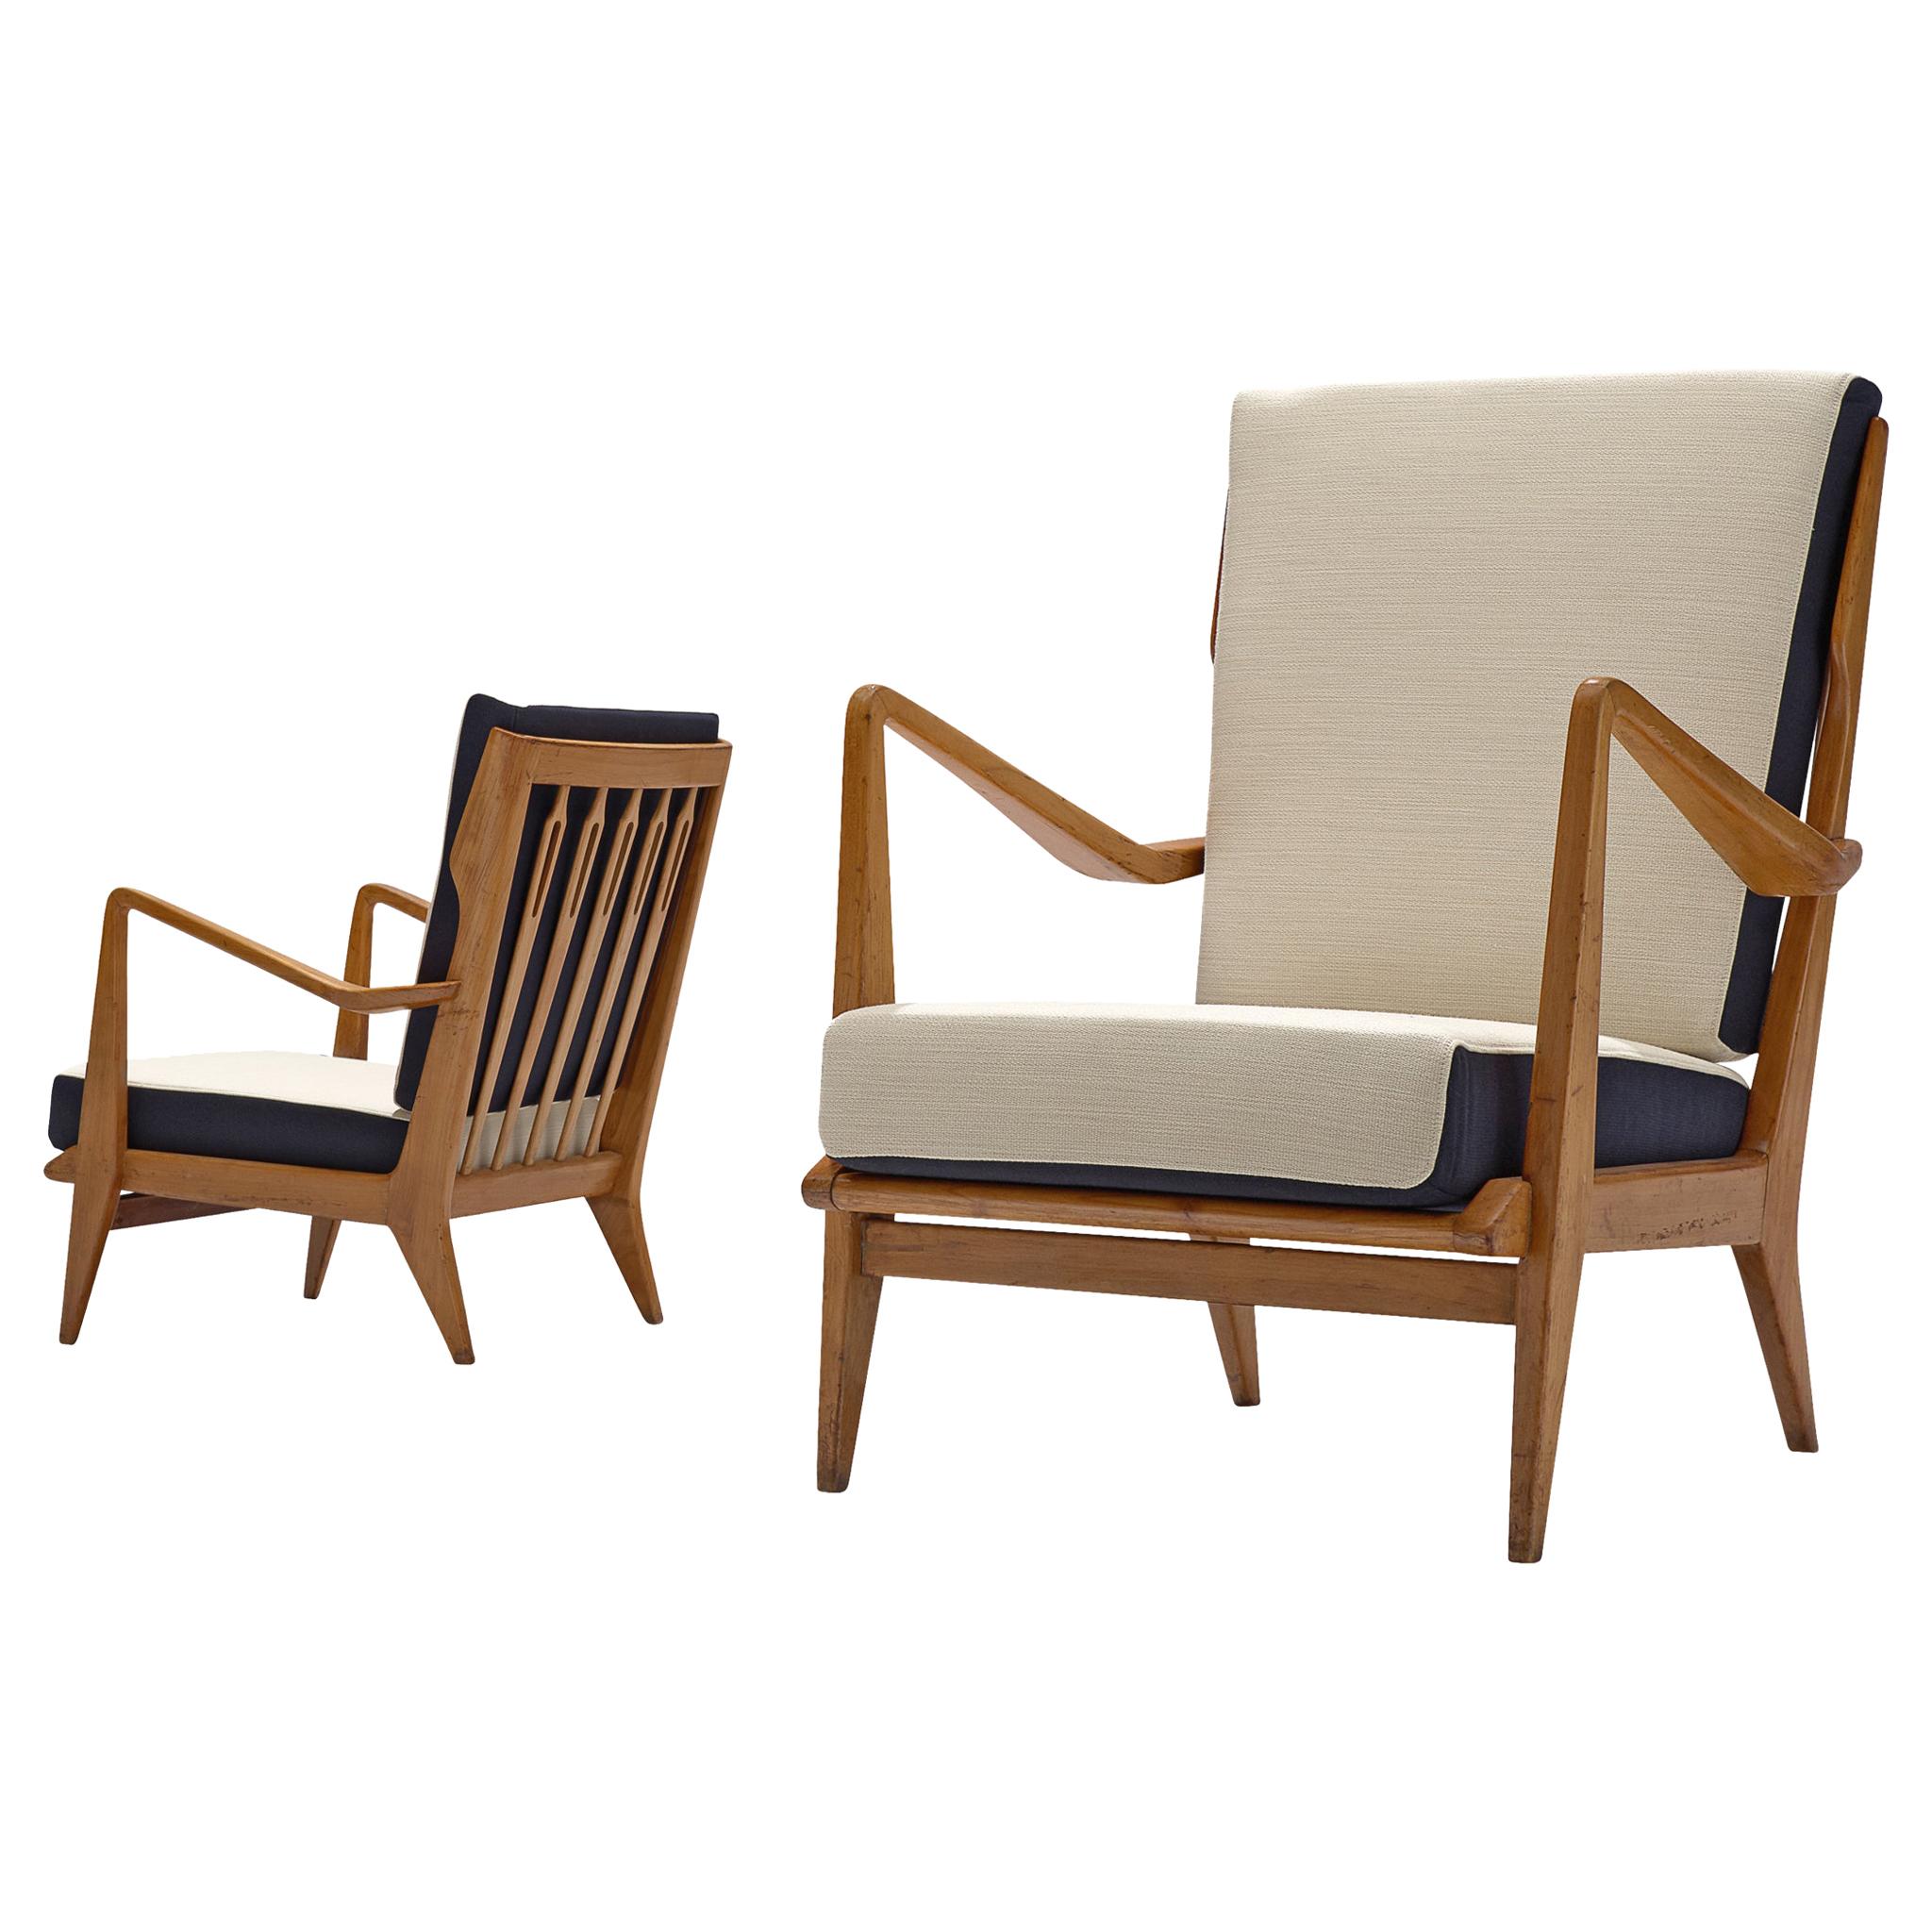 Gio Ponti for Cassina, pair of armchairs model 516, walnut, black and white balder fabric, Cassina, Italy, 1955.

This set of chairs is designed by Gio Ponti and manufactured by Cassina. The chairs have a few distinct features that stand out. For